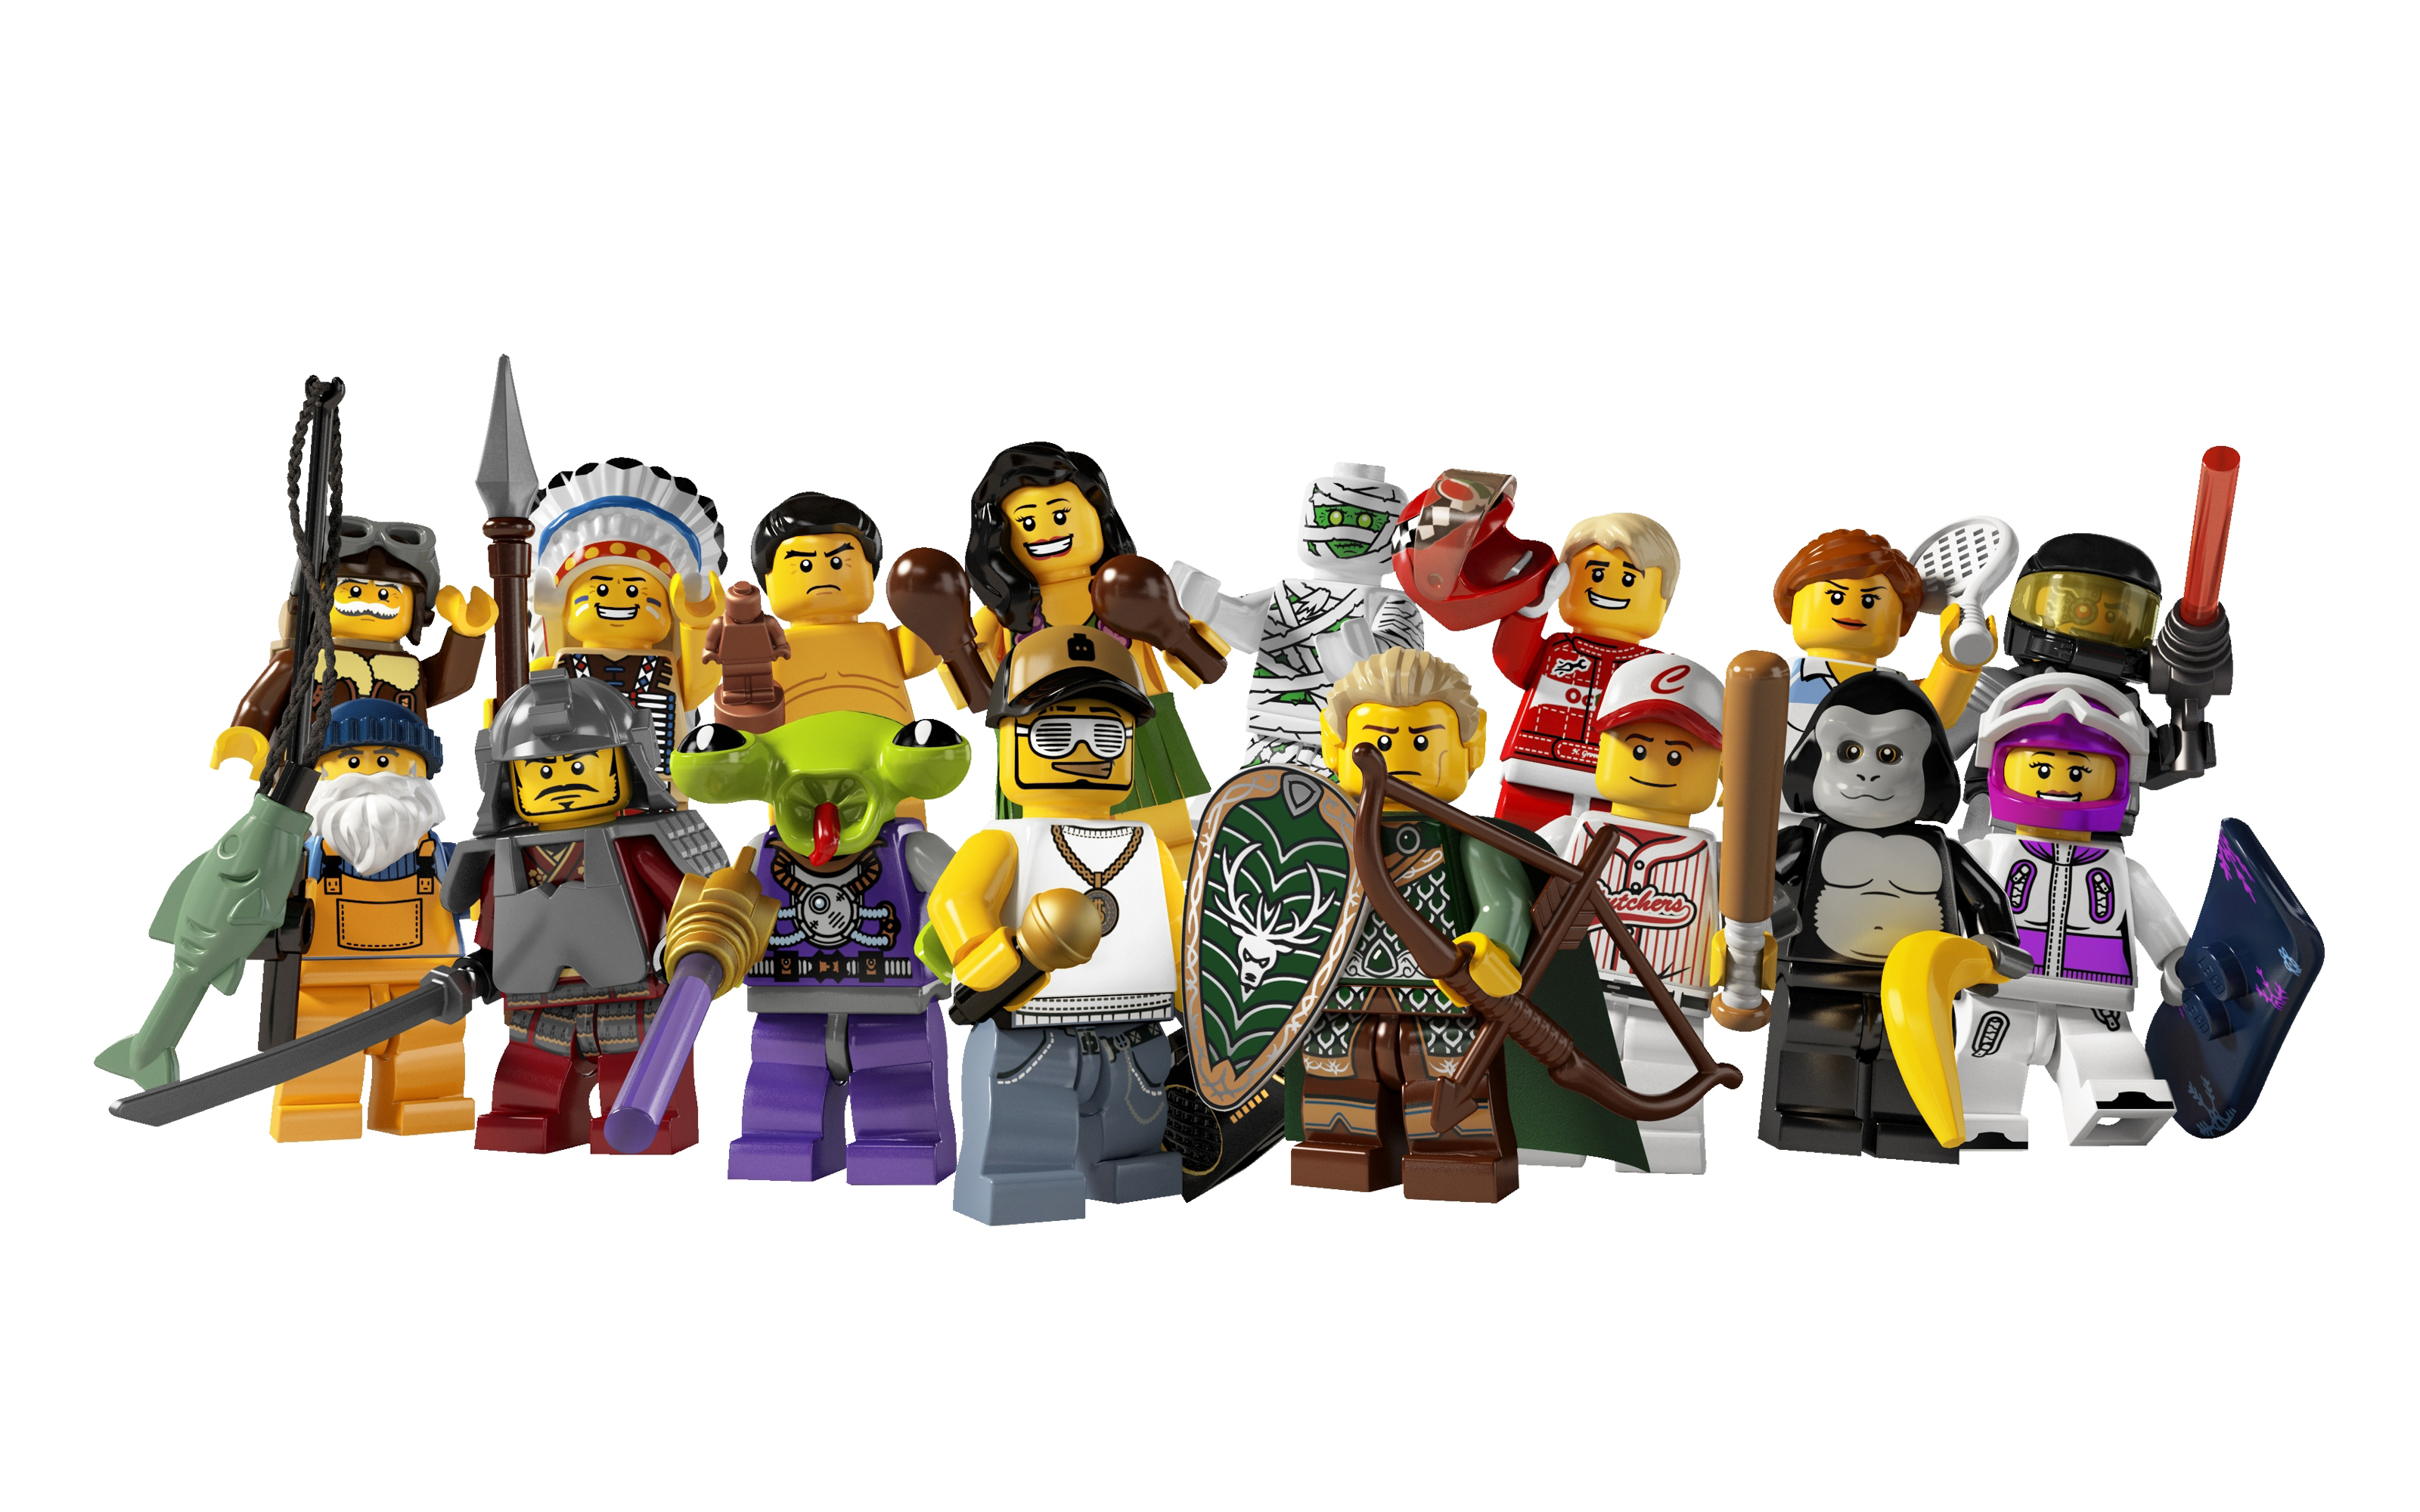 Lego 3308 series 3 collectible minifigures group shot